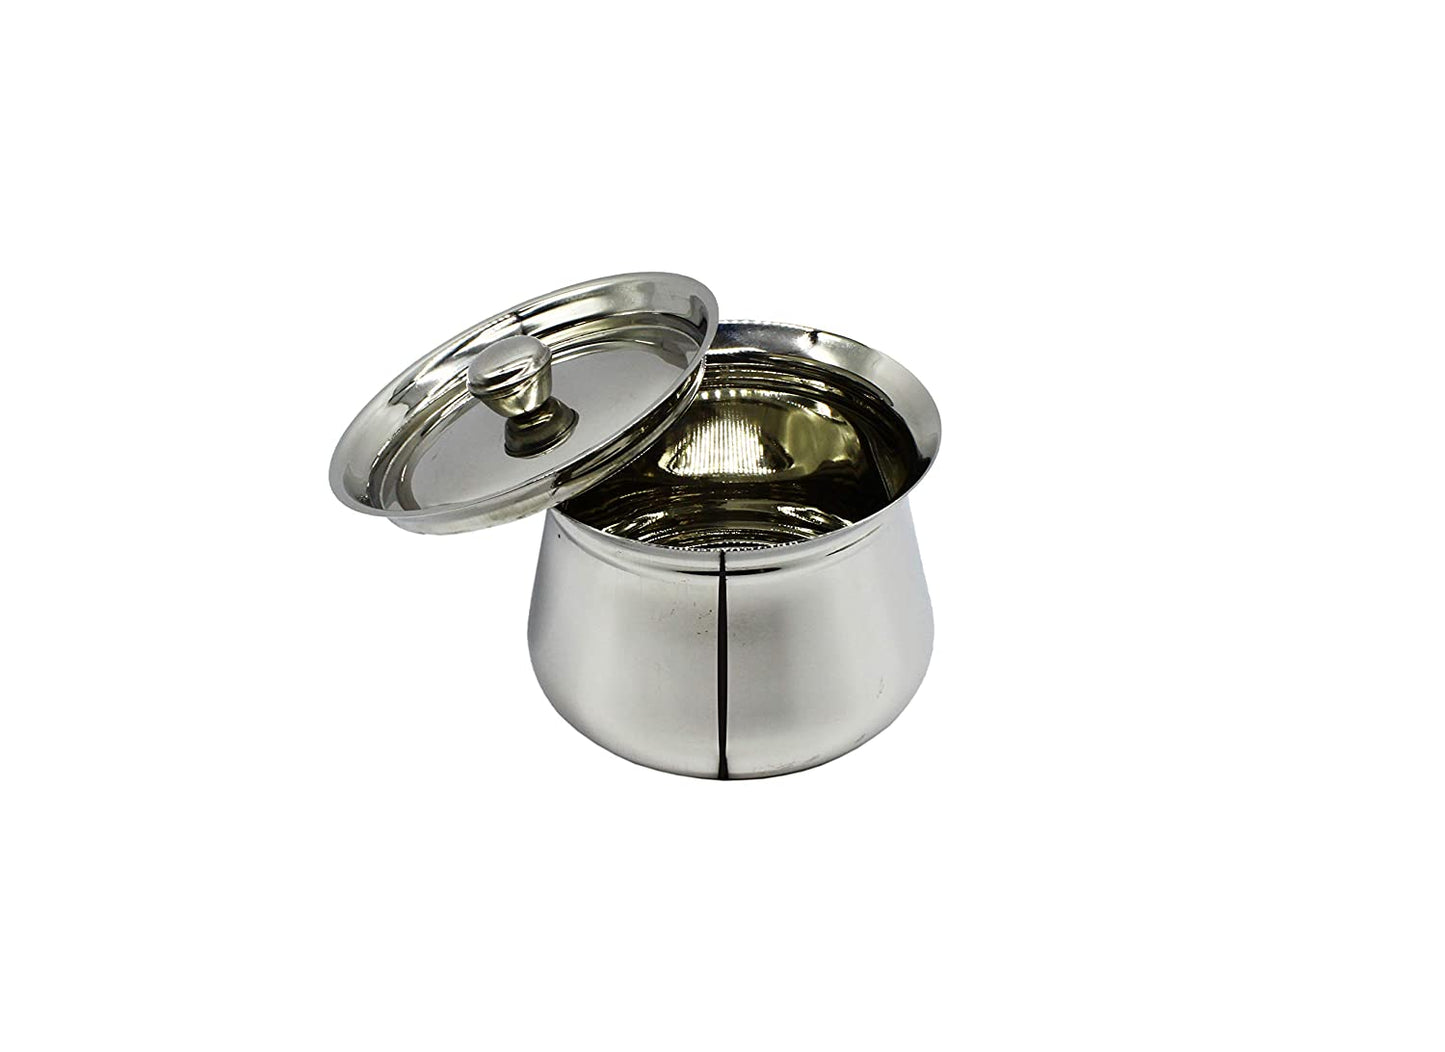 Stainless Steel Special Coil Handi Tall Serving Dish Pot Set of 3 Pcs - 10.5 cm, 12 cm, 14 cm